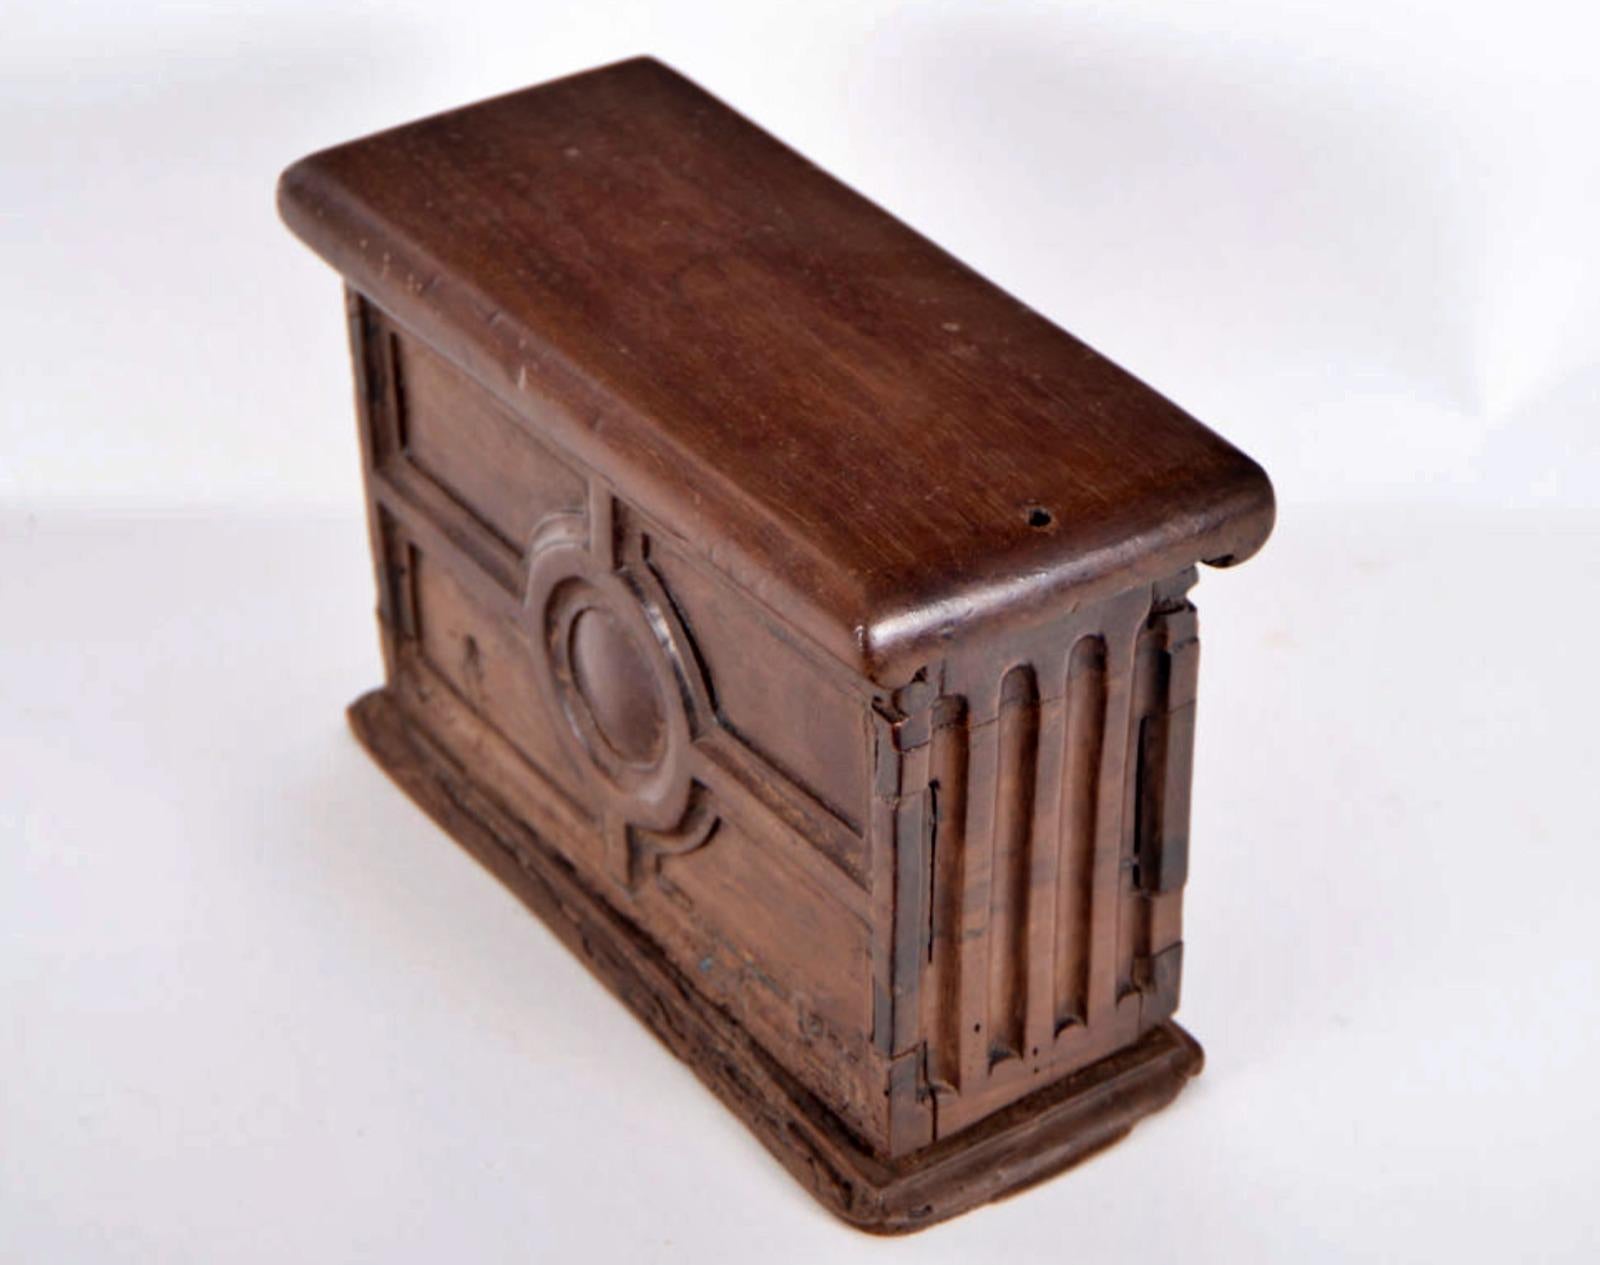 Hand-Crafted Box for the Holy Oils, Spanish School of the 17th Century